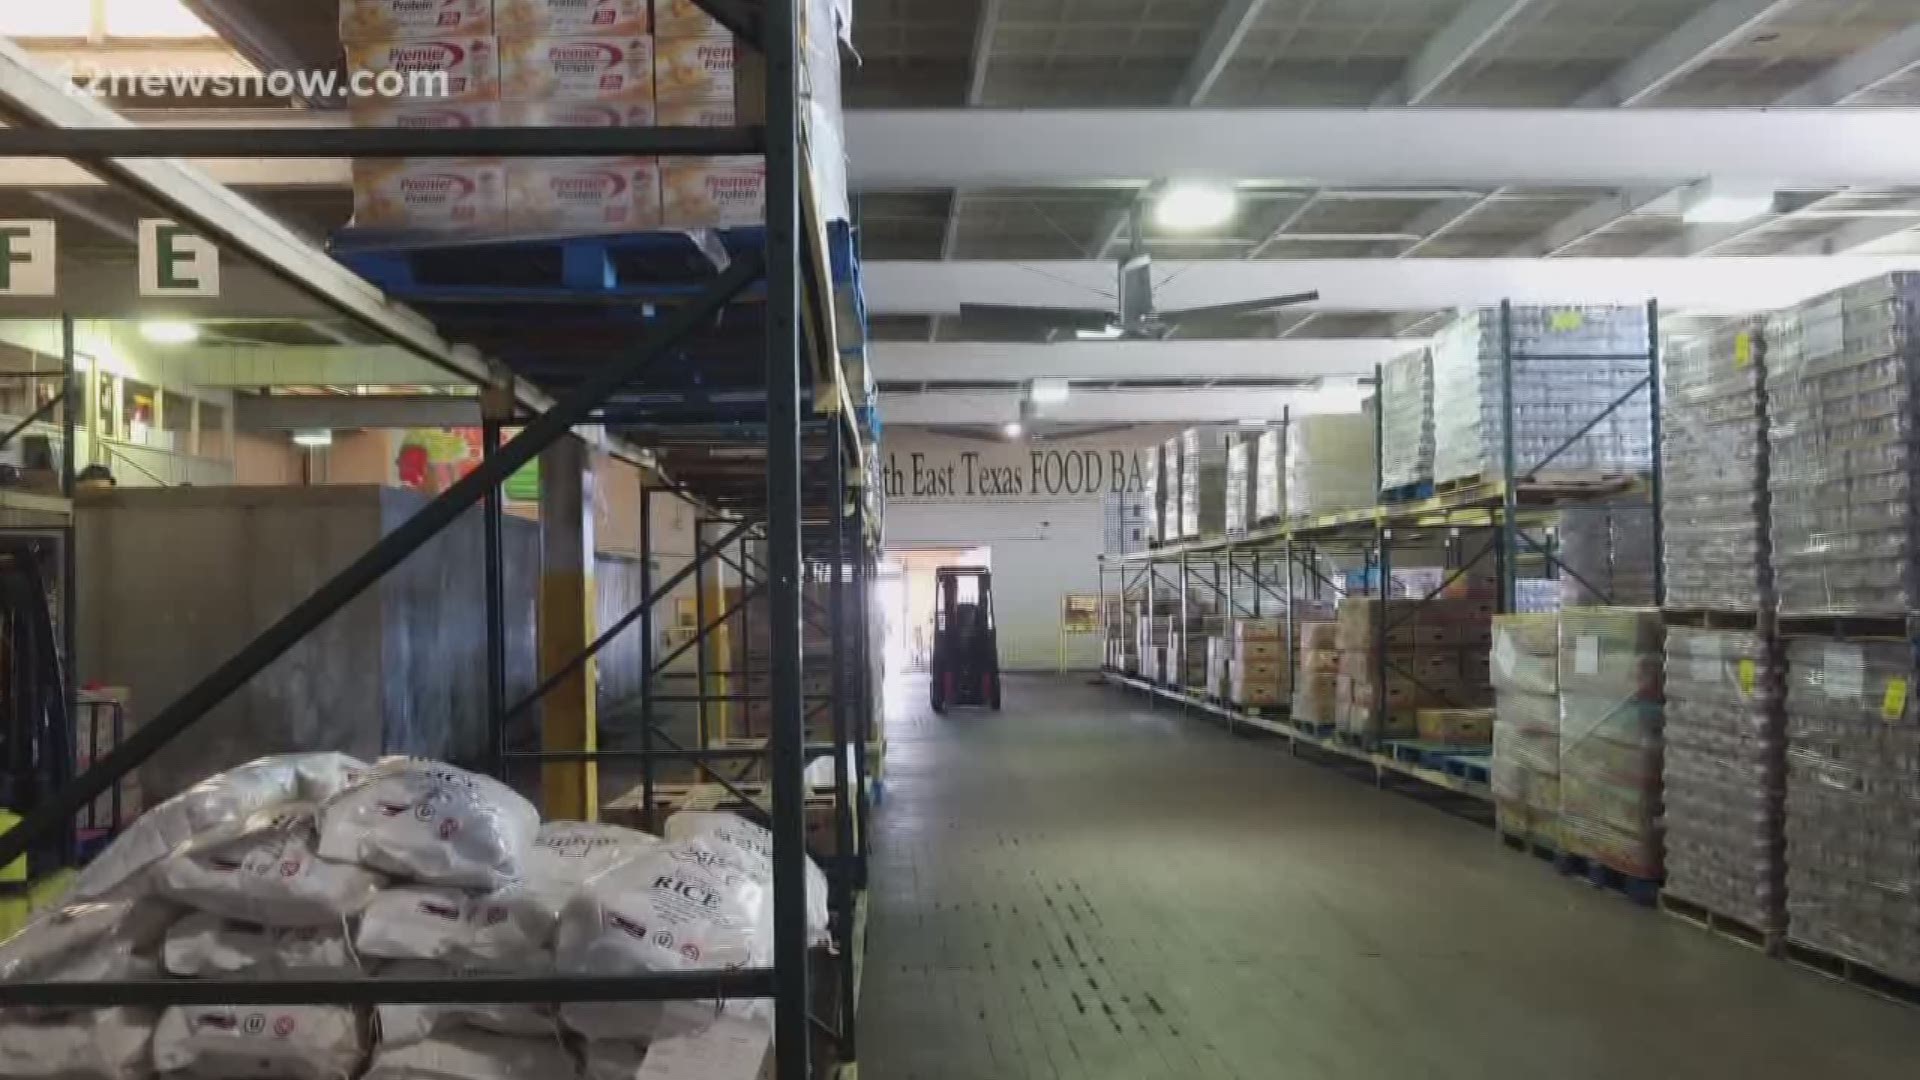 They Southeast Texas Food Bank works with 76 organizations across the eight county territory that they serve. Of those, 20 have had to shut down.